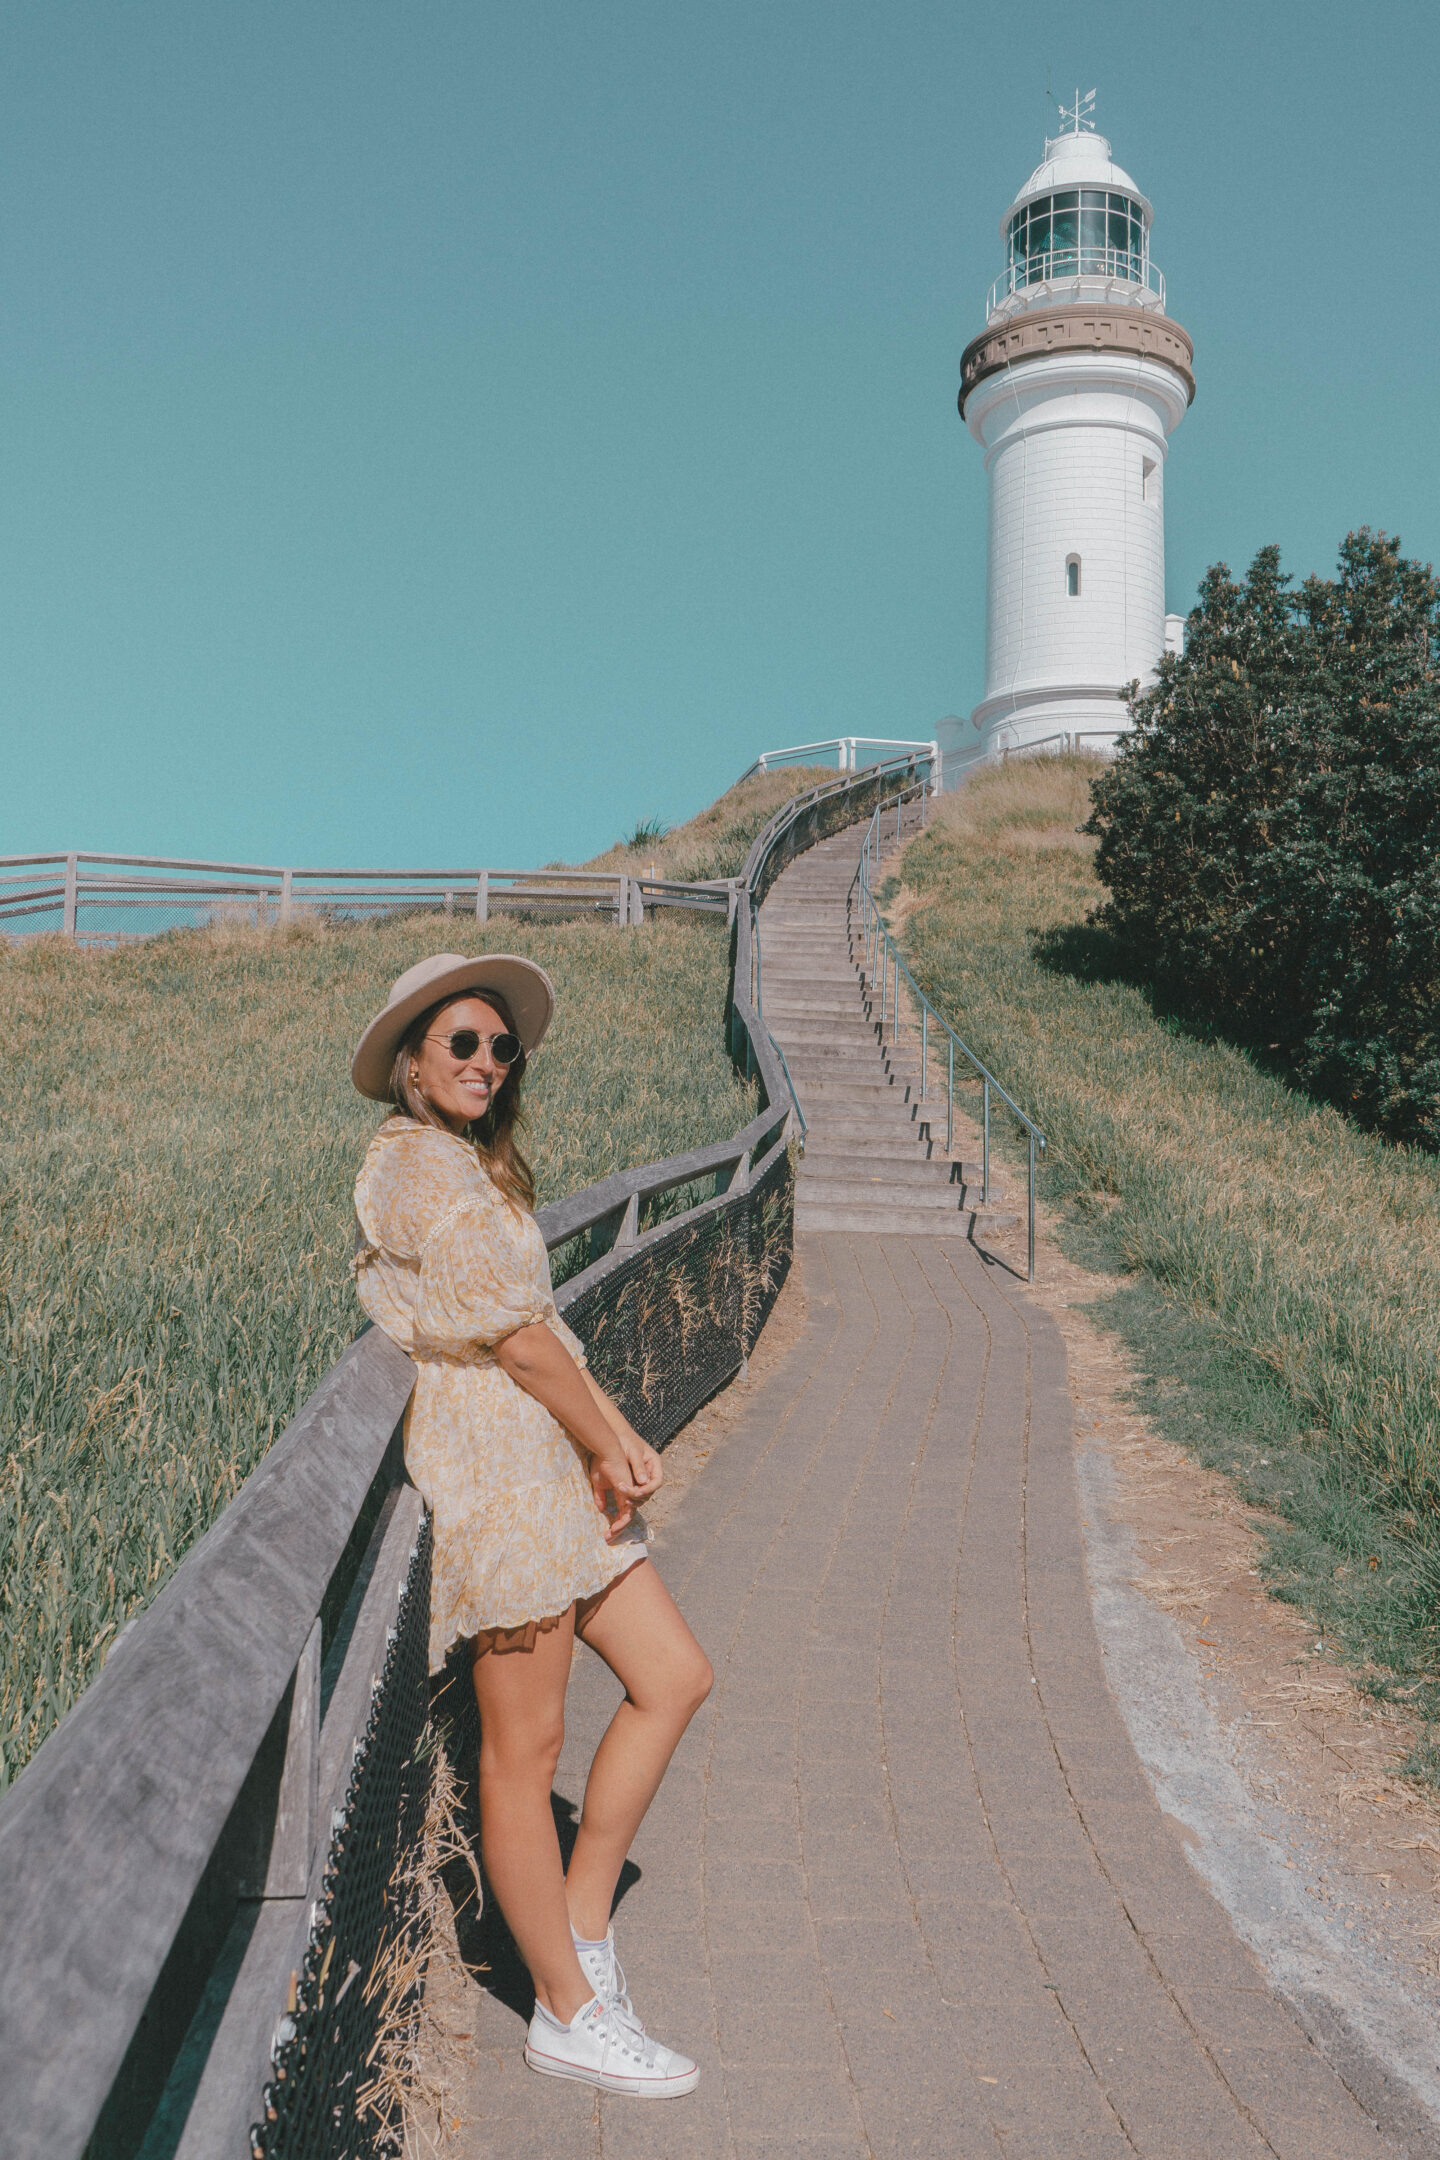 A girl in a yellow dress leans against a fence in front of the iconic Byron Bay white lighthouse that marks the most eastern point in Australia